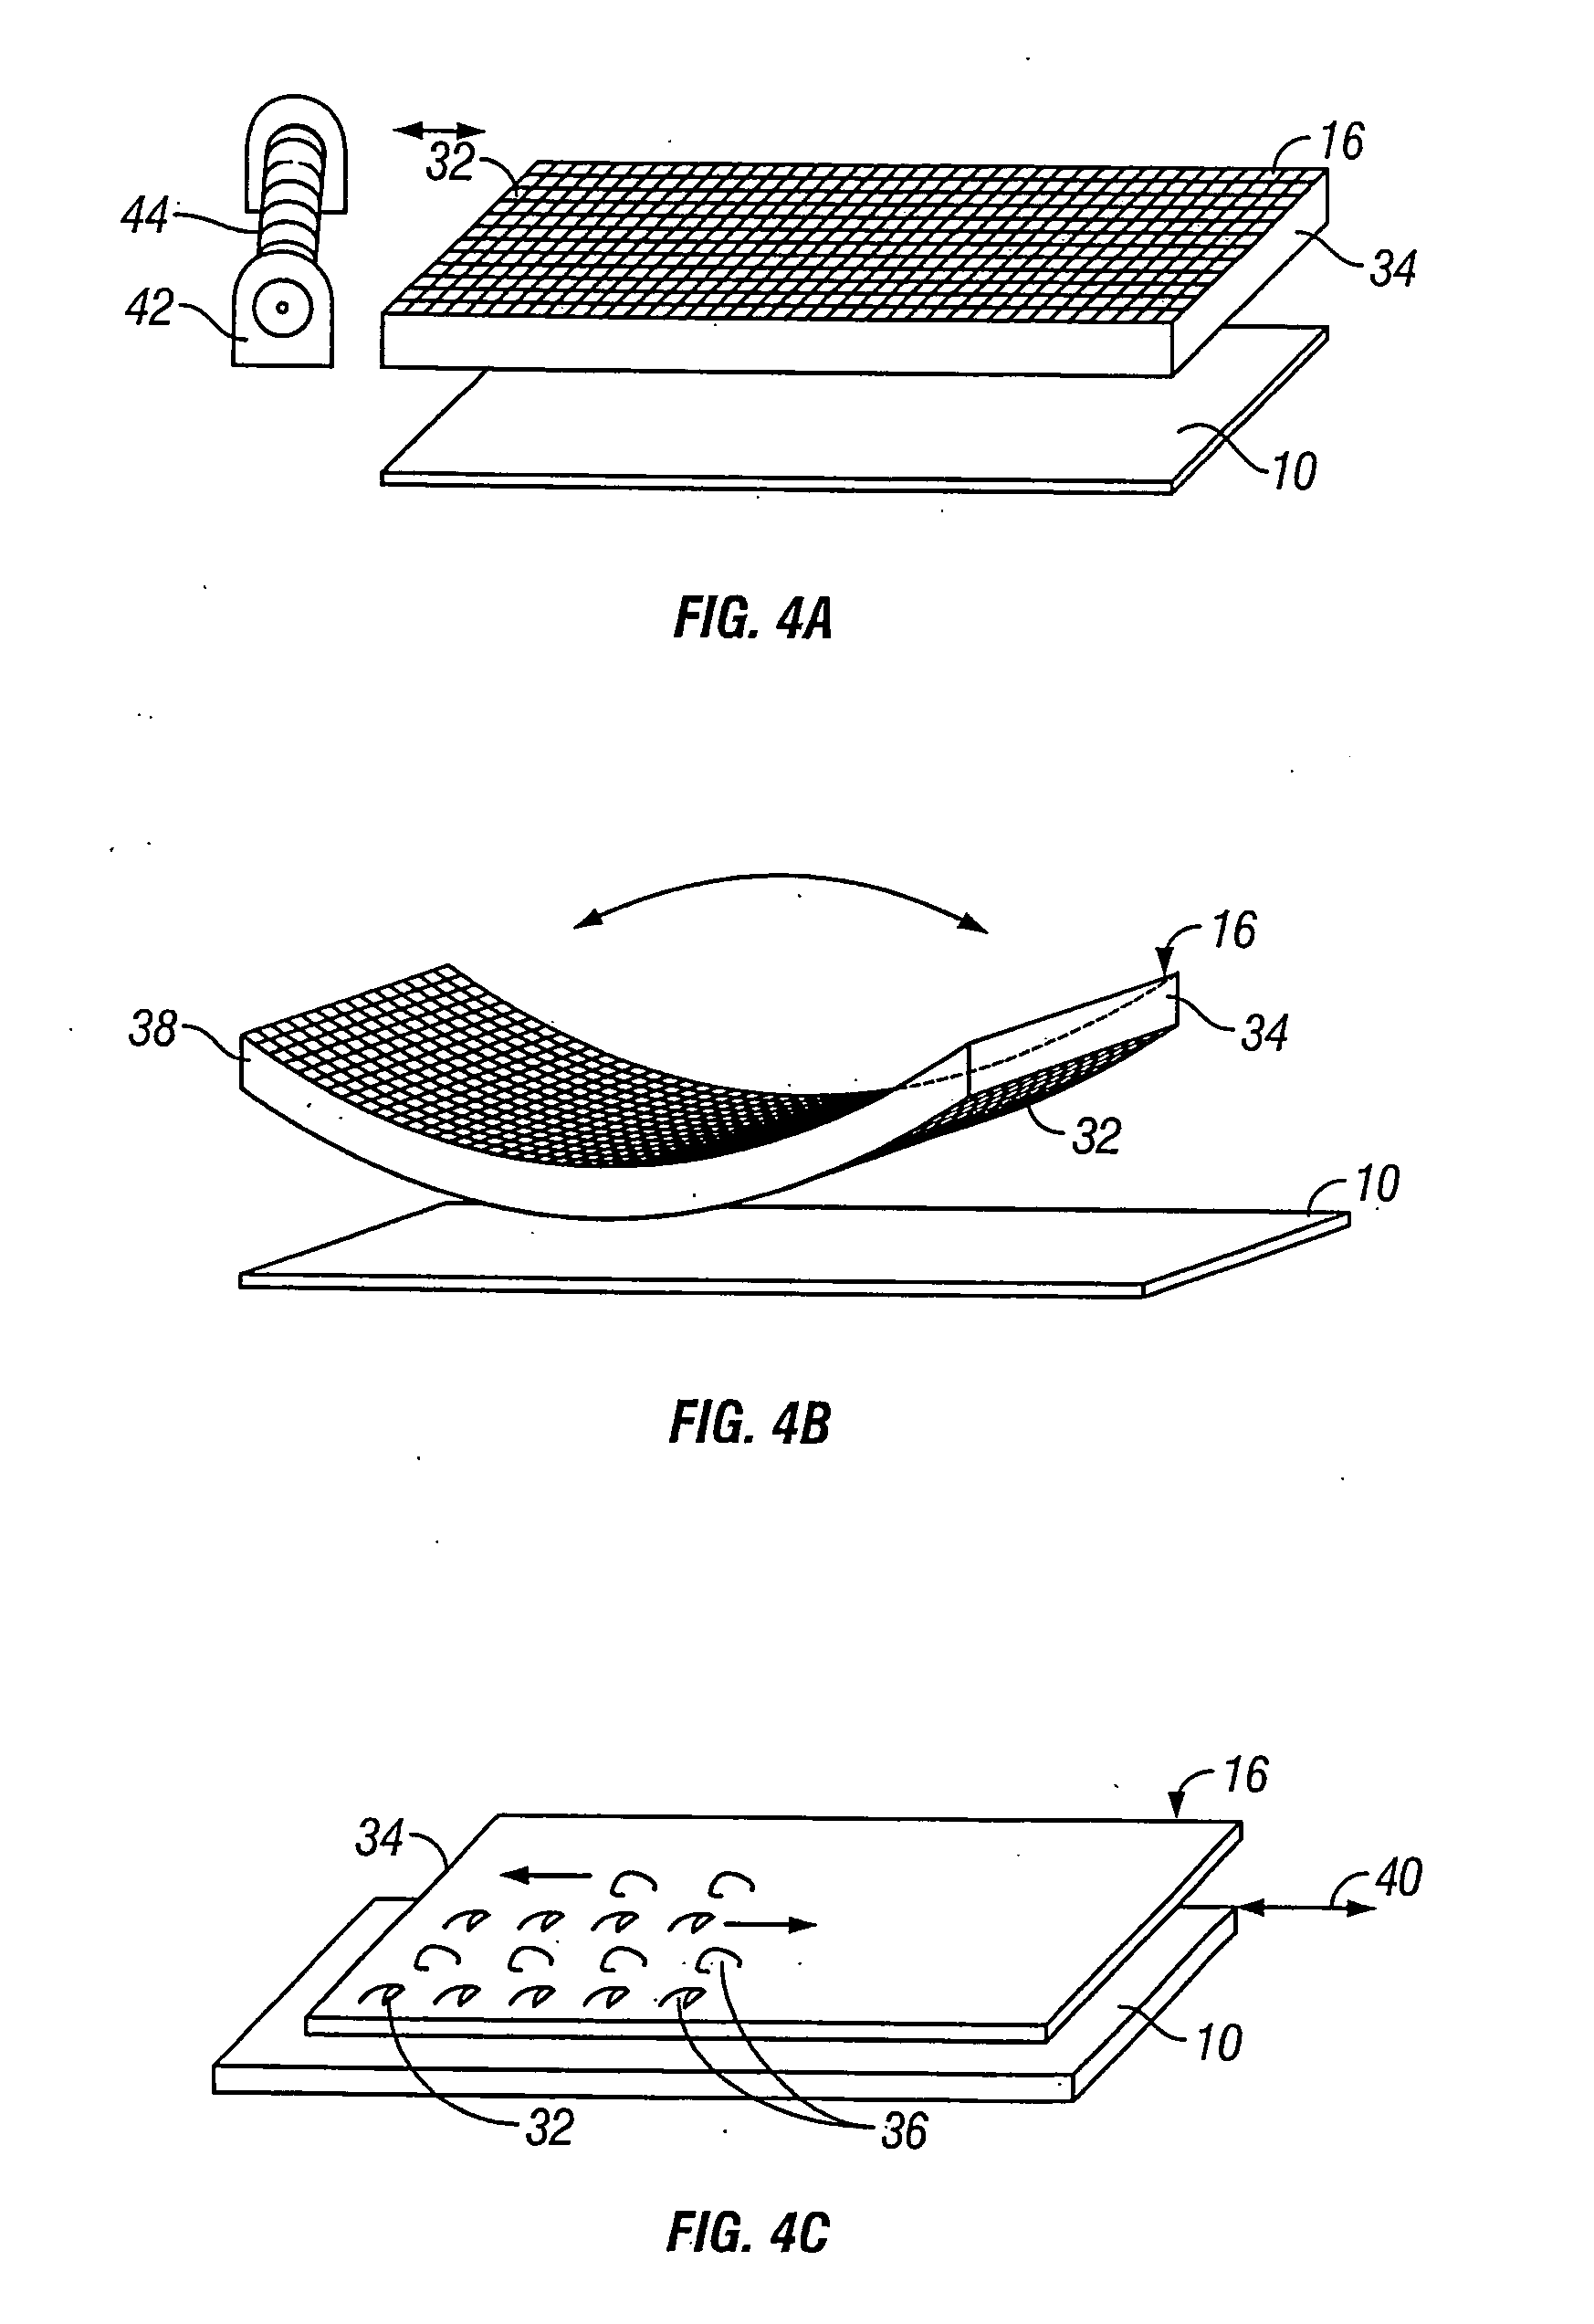 Tissue harvesting device and method